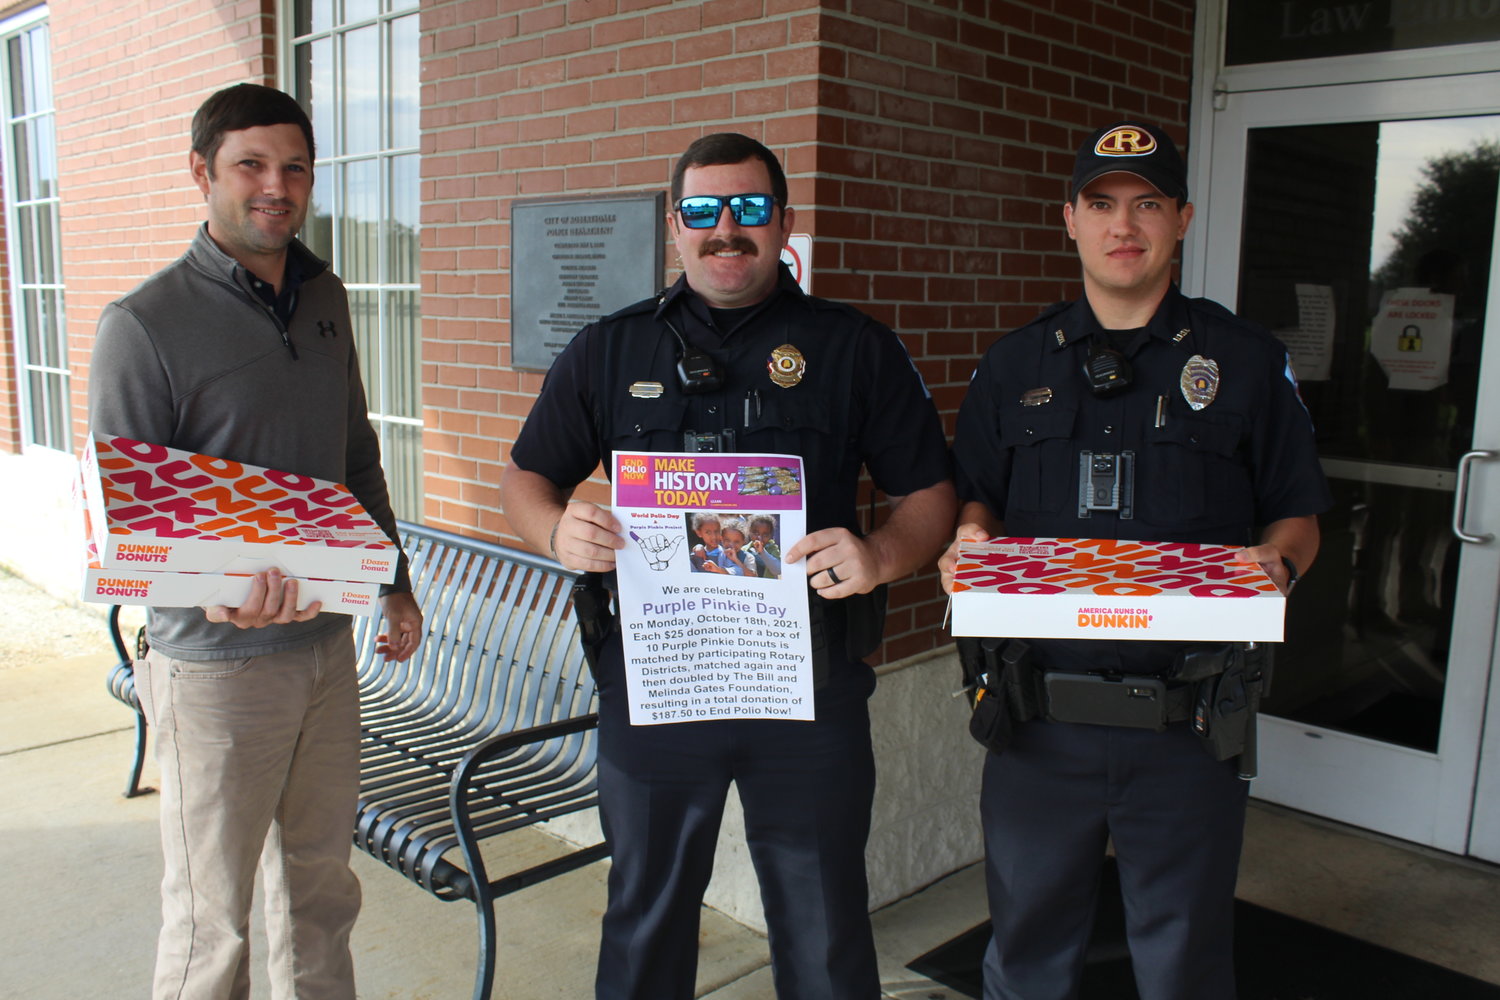 Ryan Frolik, left, Robertsdale Rotary Club vice president/president-elect for 2021-22, delivers Purple Pinkie donuts to the Robertsdale Police Department on Monday, Oct. 18 as part of Purple Pinkie Day for Polio Plus Eradication. Pictured with Frolik are RPD officers Fred Stringer, center, and Zach Williams.